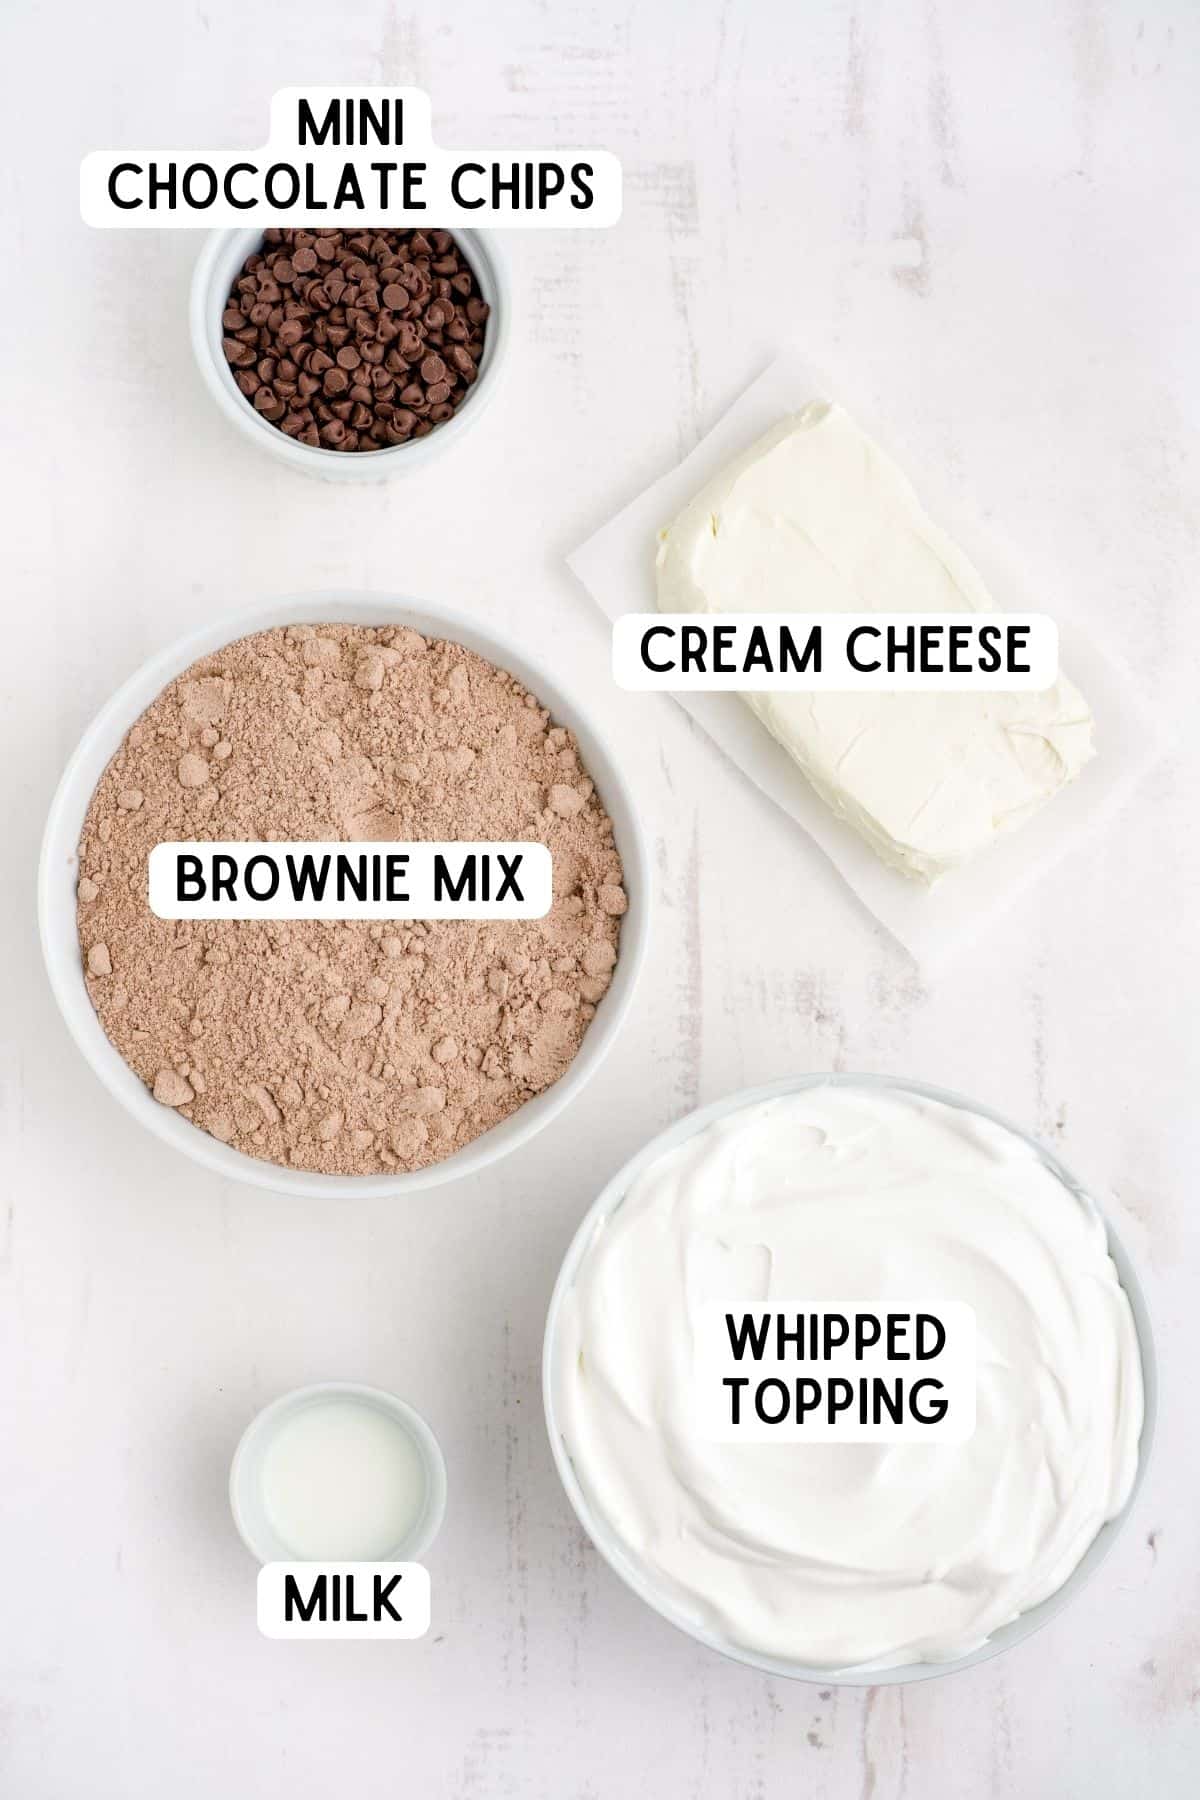 Whipped topping, milk, block of cream cheese, mini chocolate chips, and brownie mix.